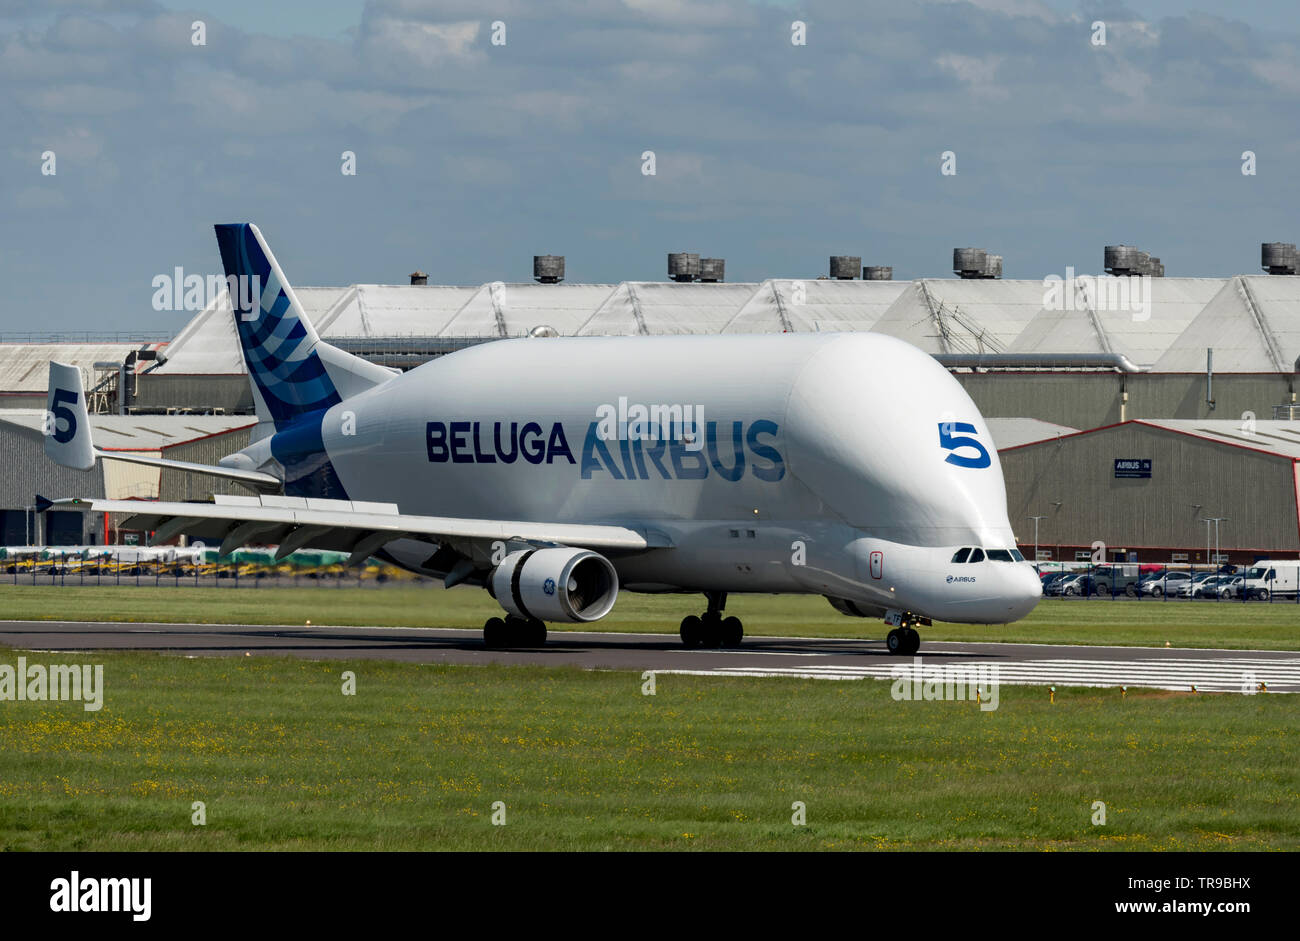 Airbus Airbus A300-600ST Beluga, F-GSTF on runway after touchdown/landing Stock Photo